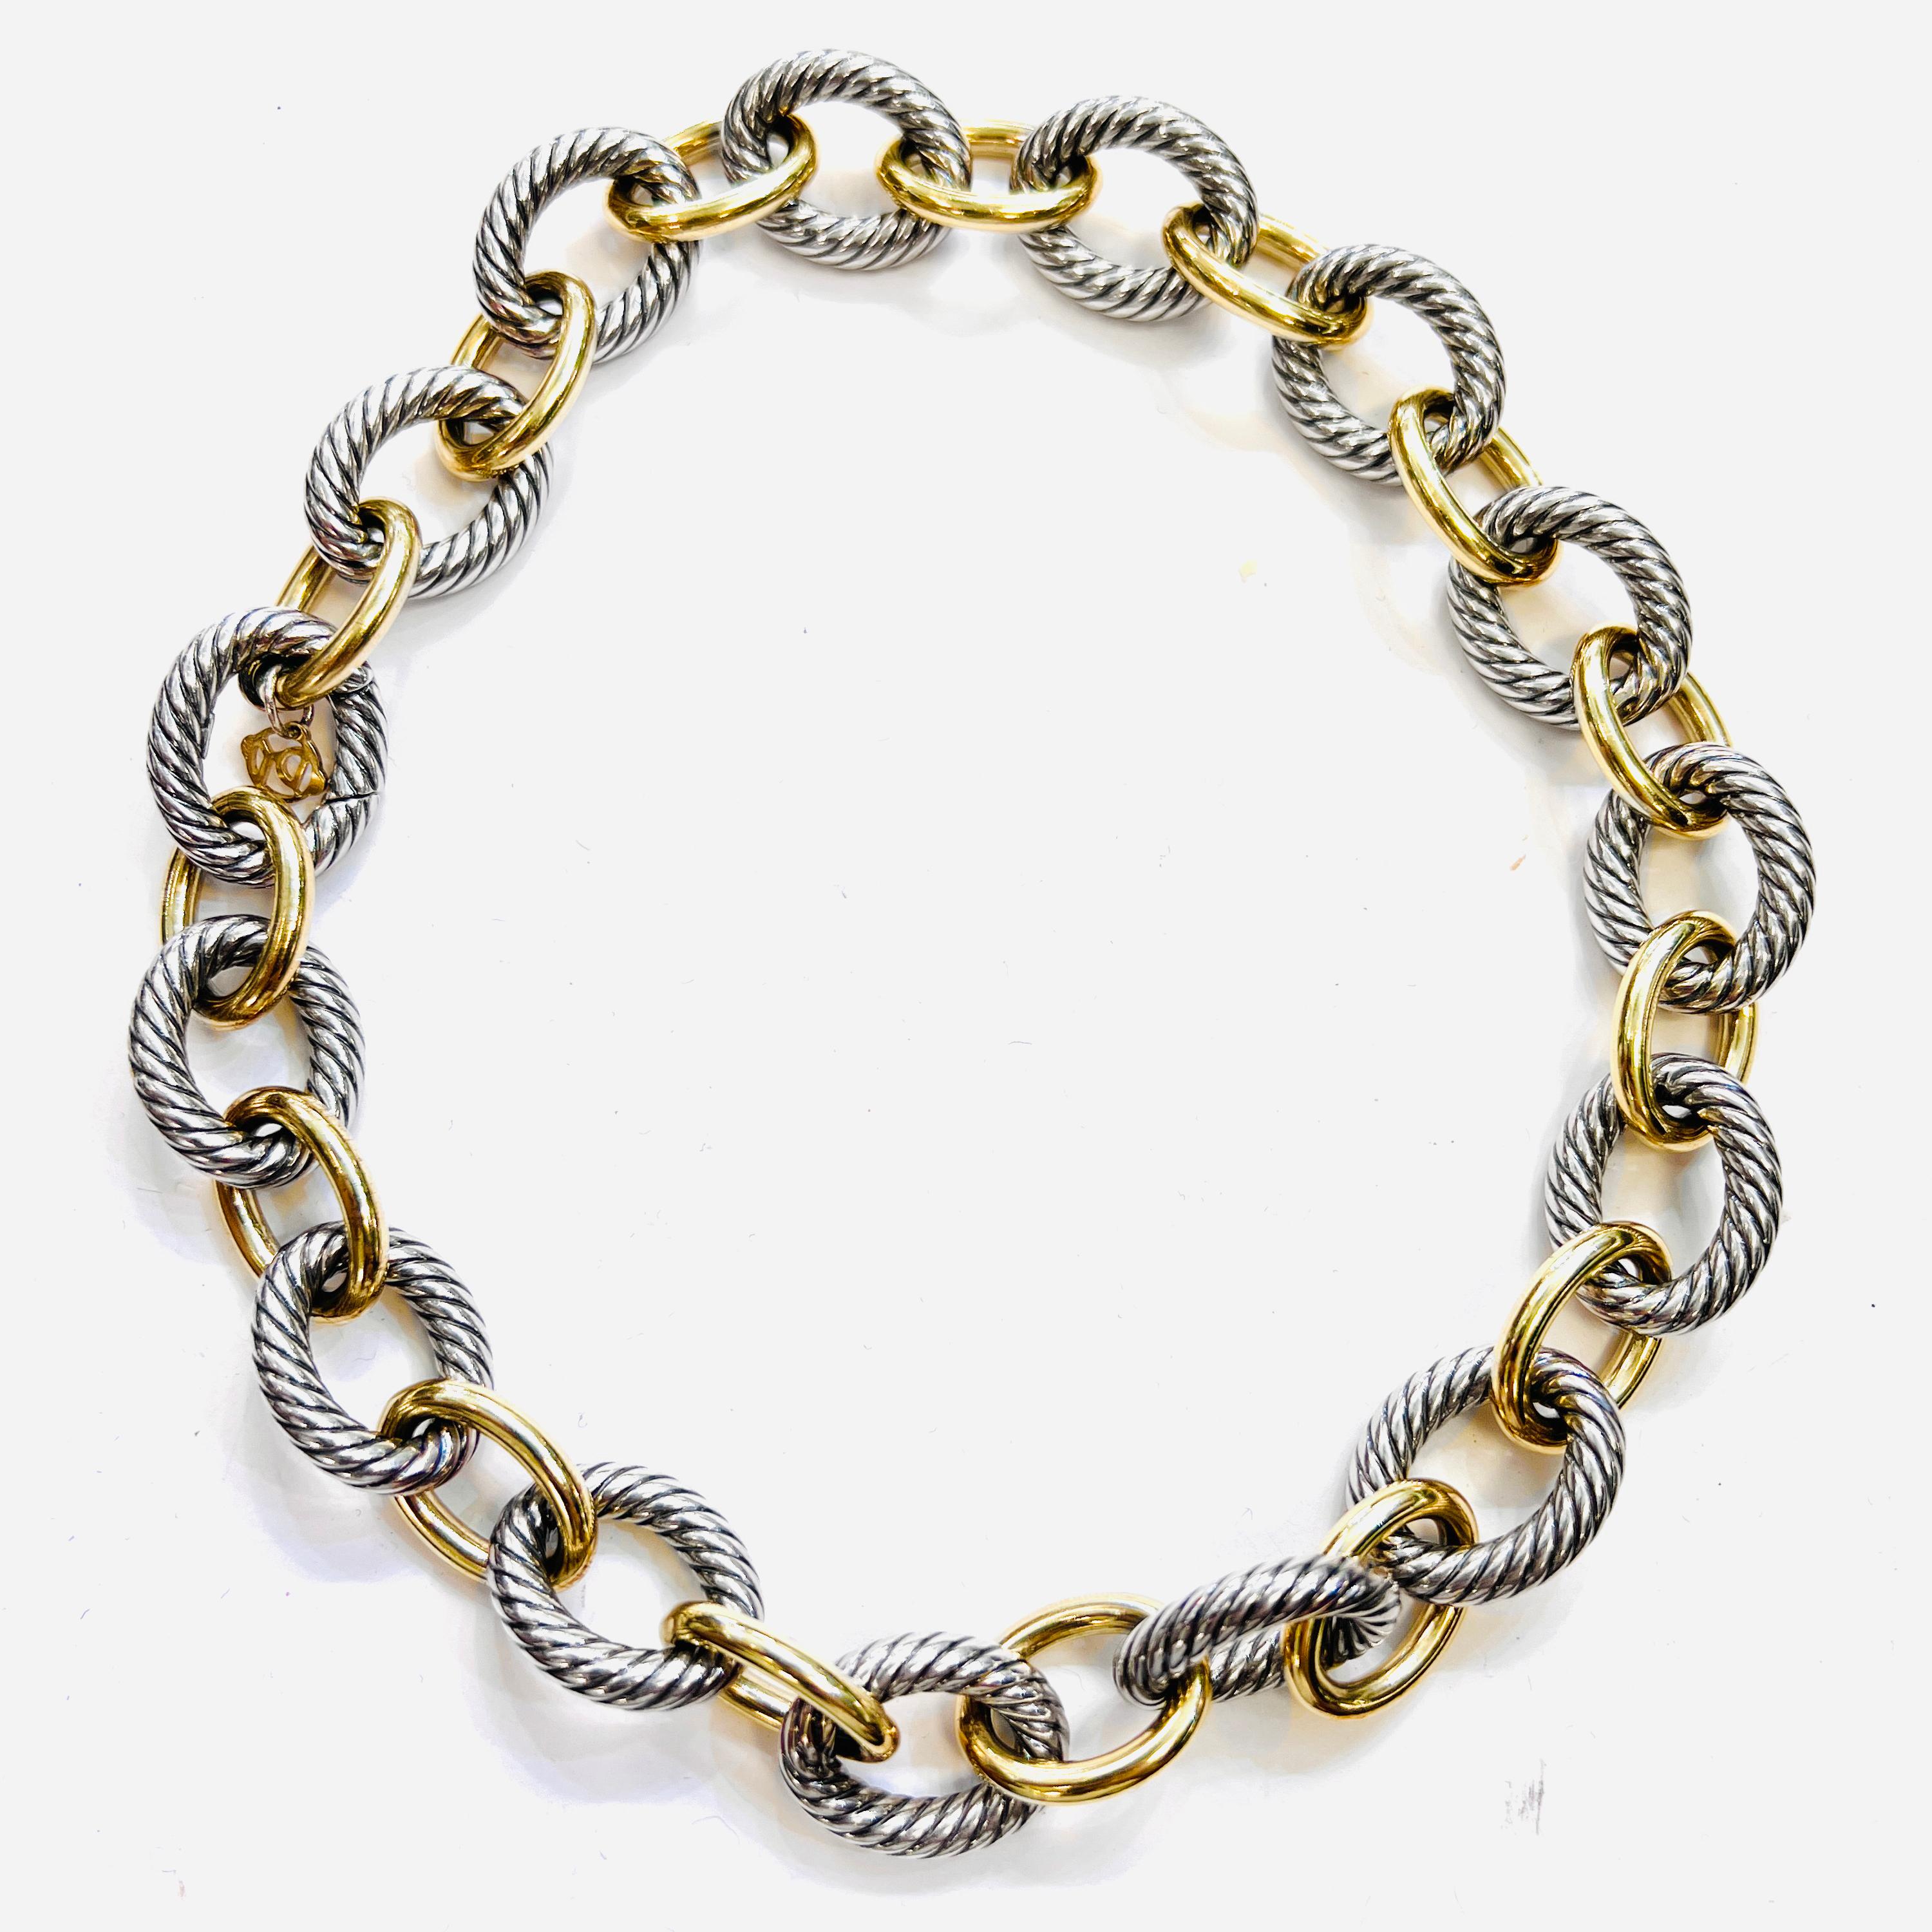 David Yurman 18K Gold and Sterling Silver Extra-Large Oval Link Necklace

Sterling Silver Bonded with 18-karat Yellow Gold 
Silver links are 23mm. Gold links are 20mm. 16 inches length
Lobster clasp

MSRP: $4,125.00.
Signed David Yurman